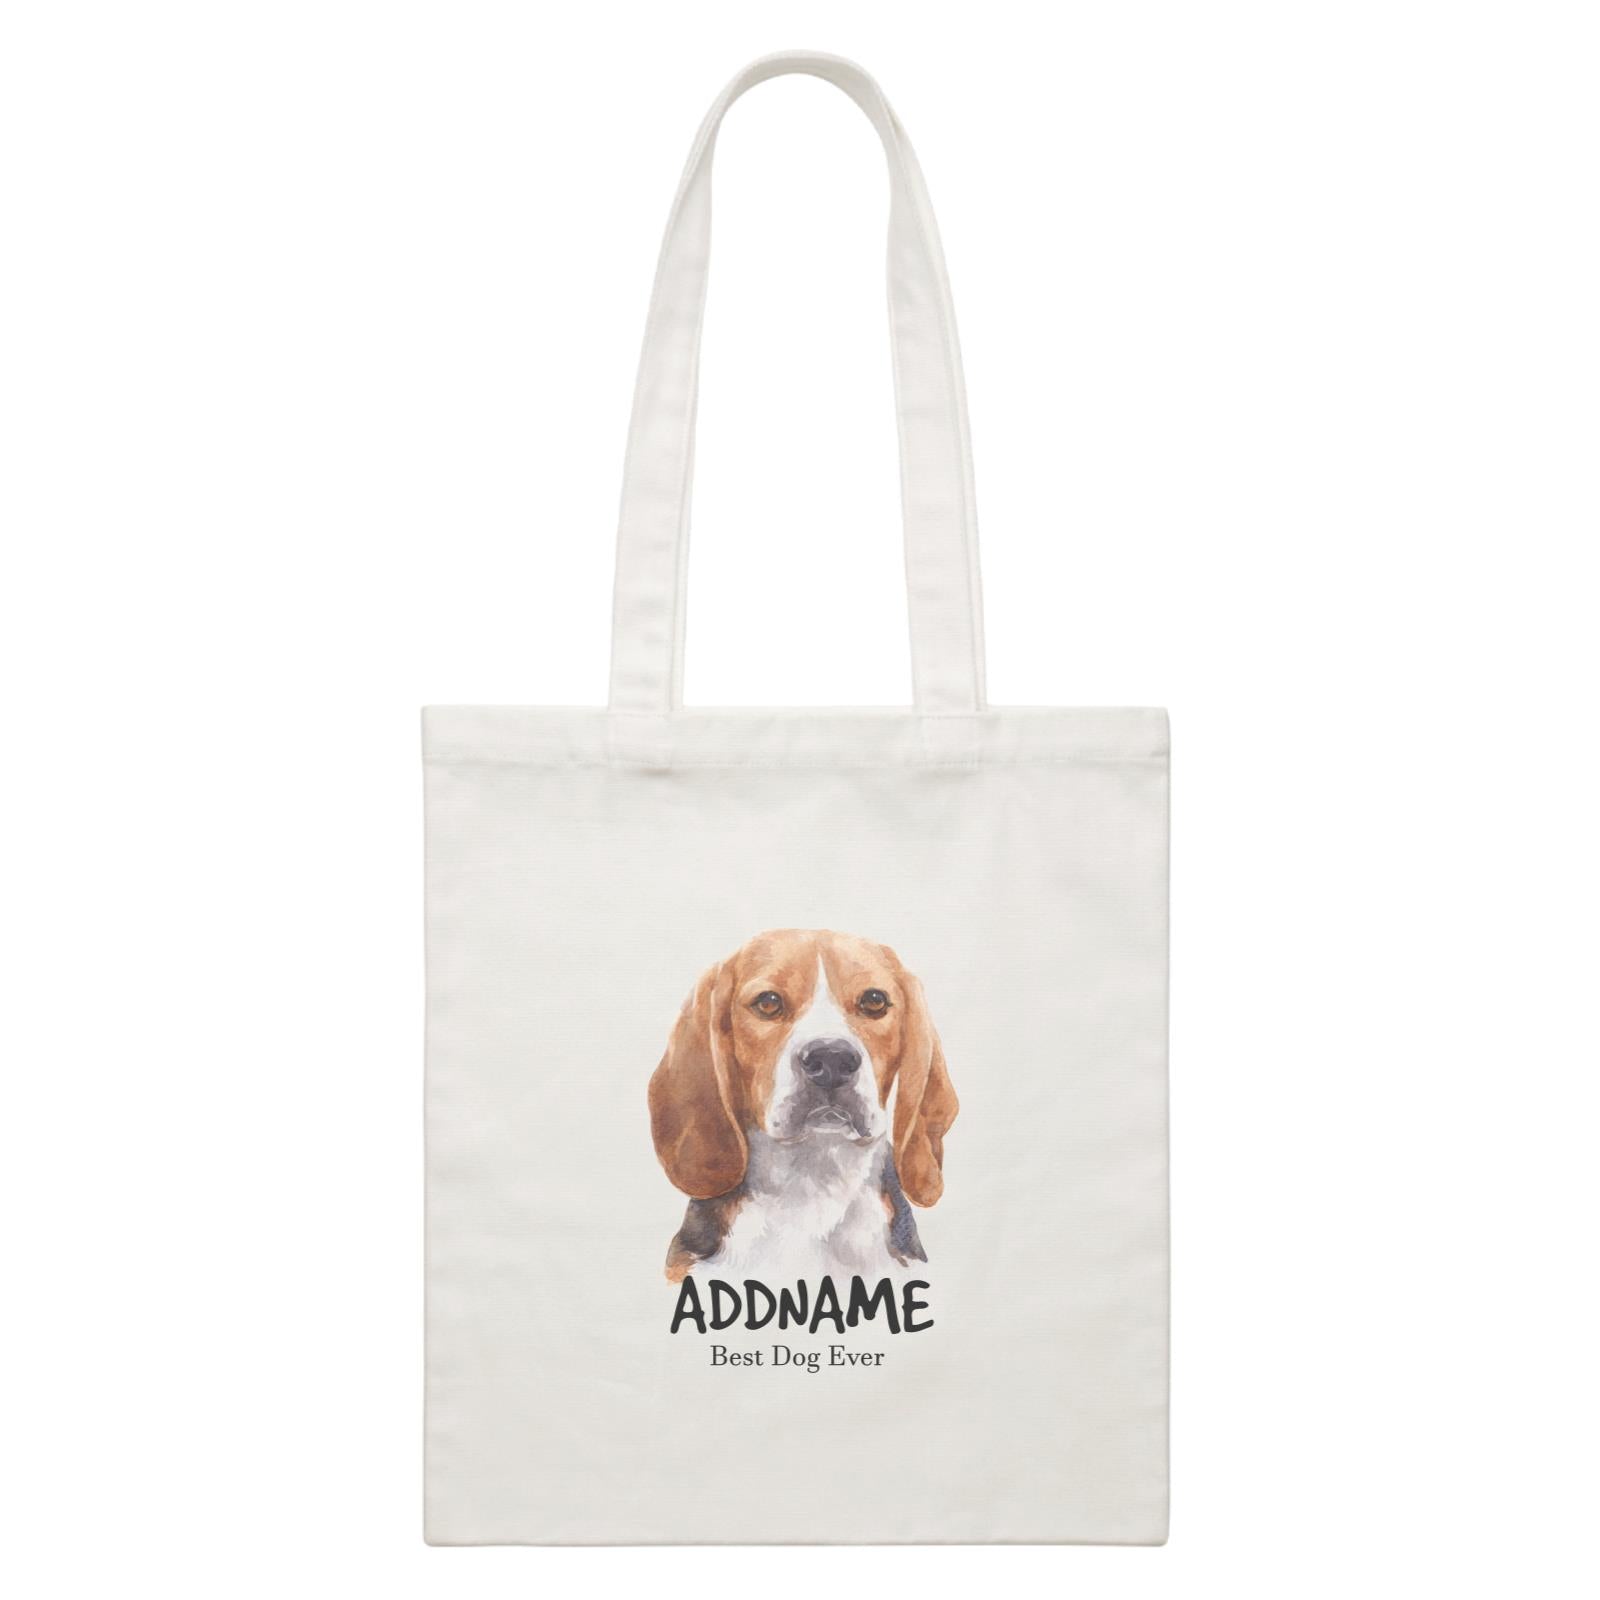 Watercolor Dog Beagle Frown Best Dog Ever Addname White Canvas Bag